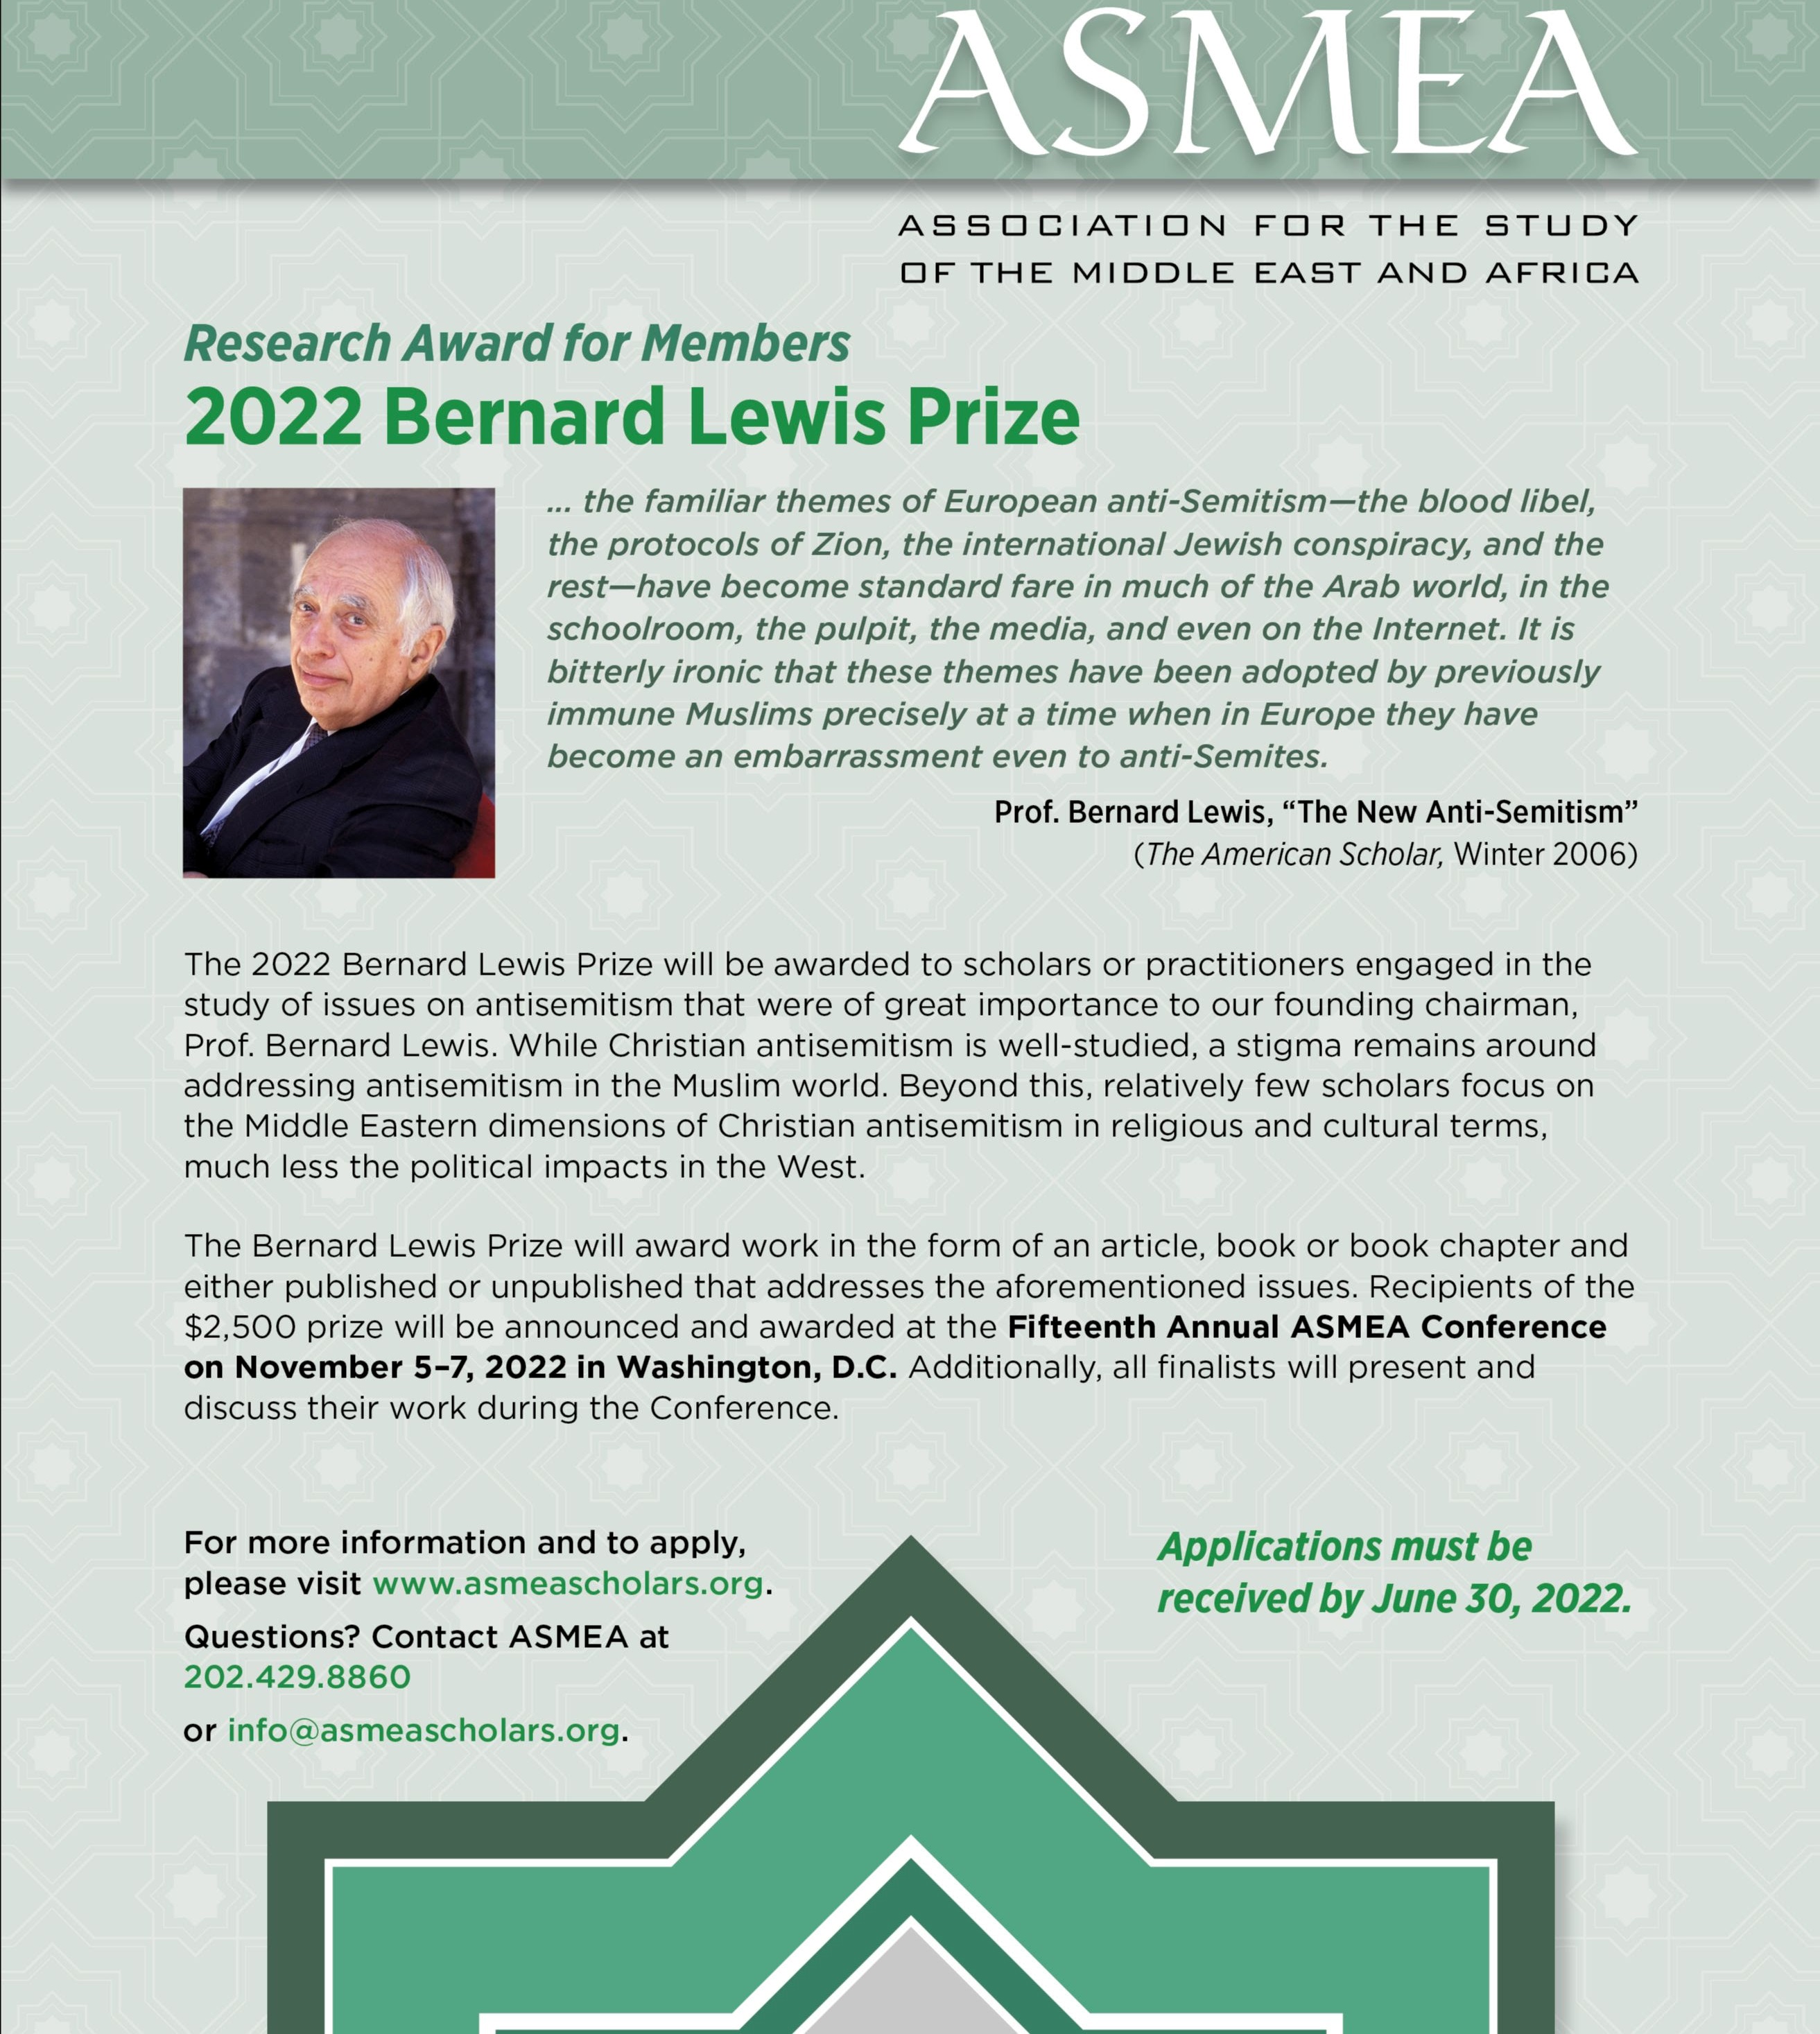 Association for the Study of the Middle East and Africa (ASMEA): 2022 Bernard Lewis Prize